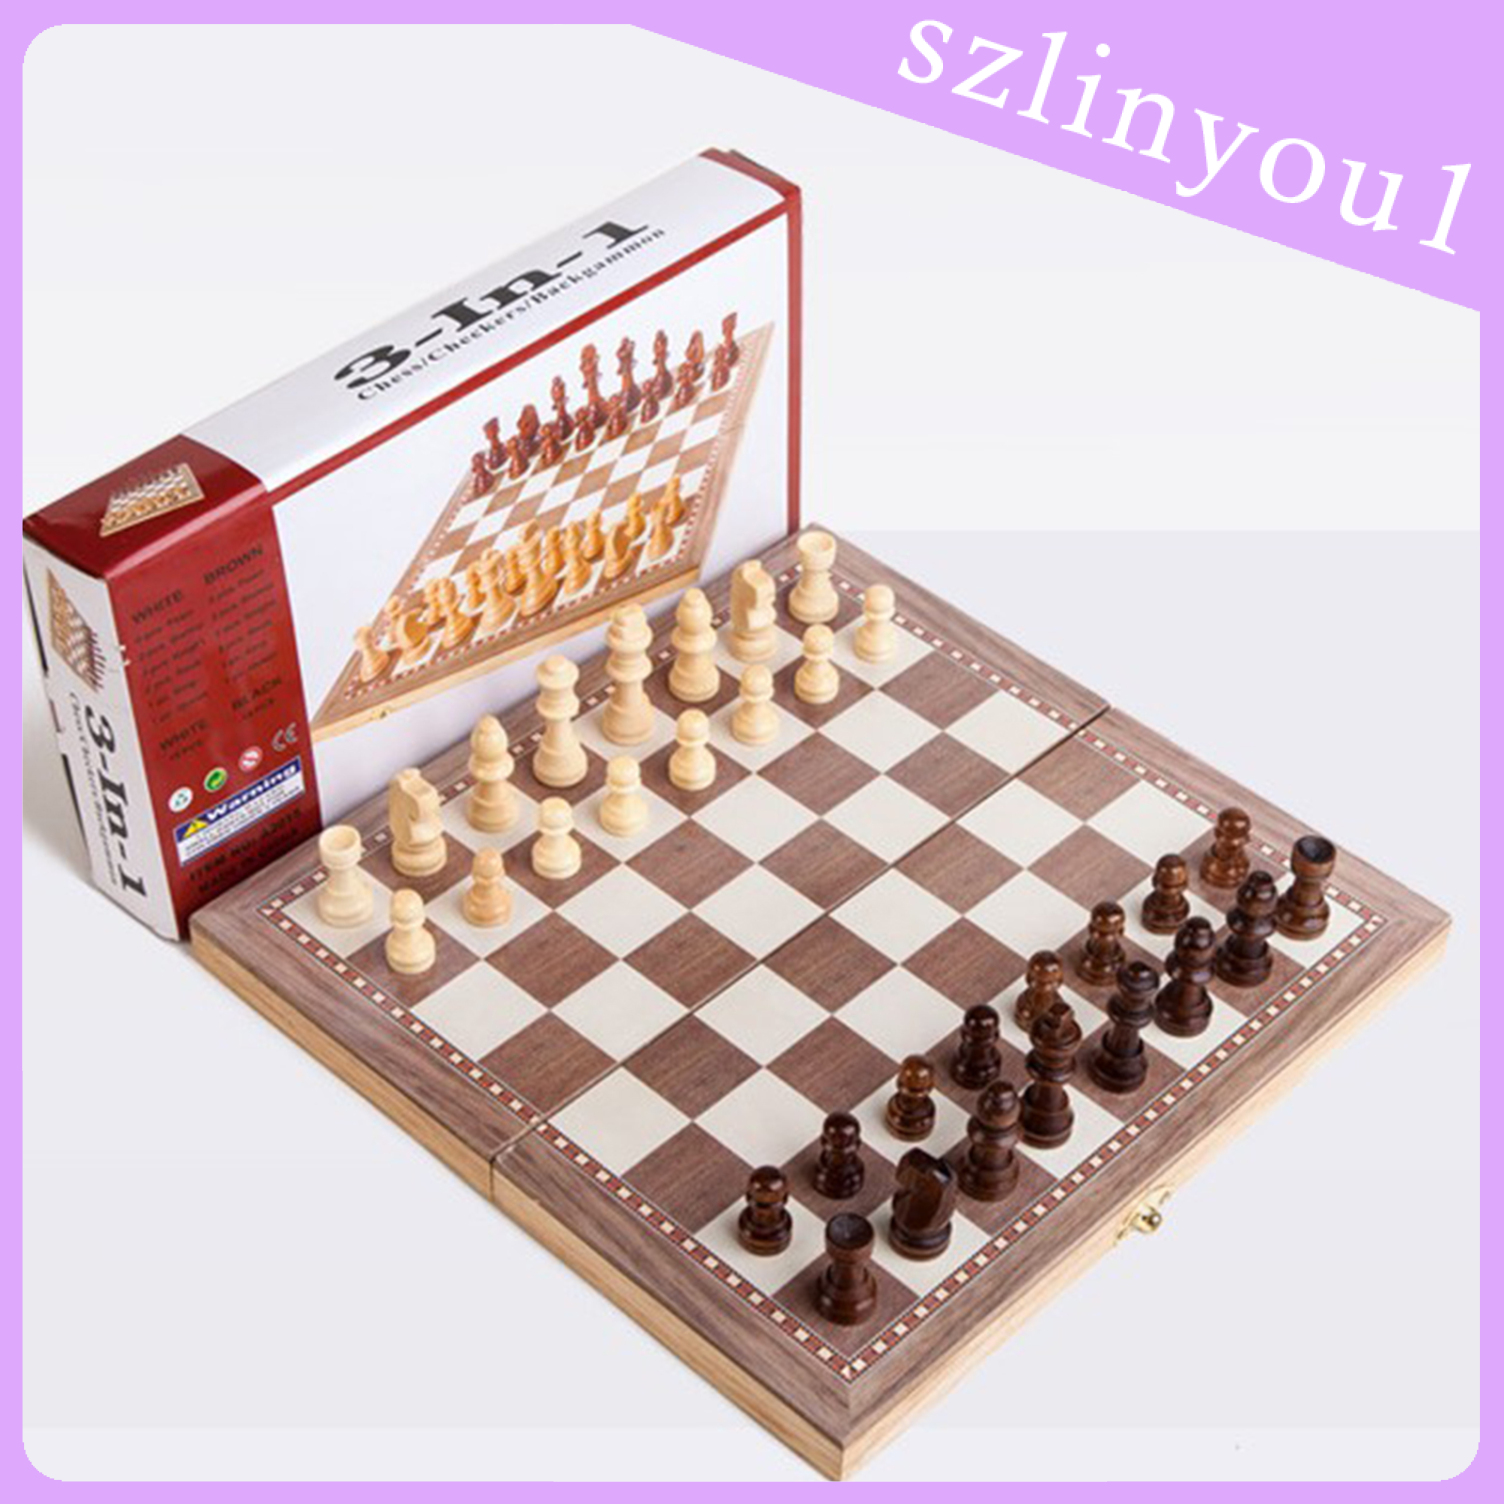 New Arrival Folding Wooden Chess Set Travel Game Toys Chess Backgammon Checkers 30x30cm